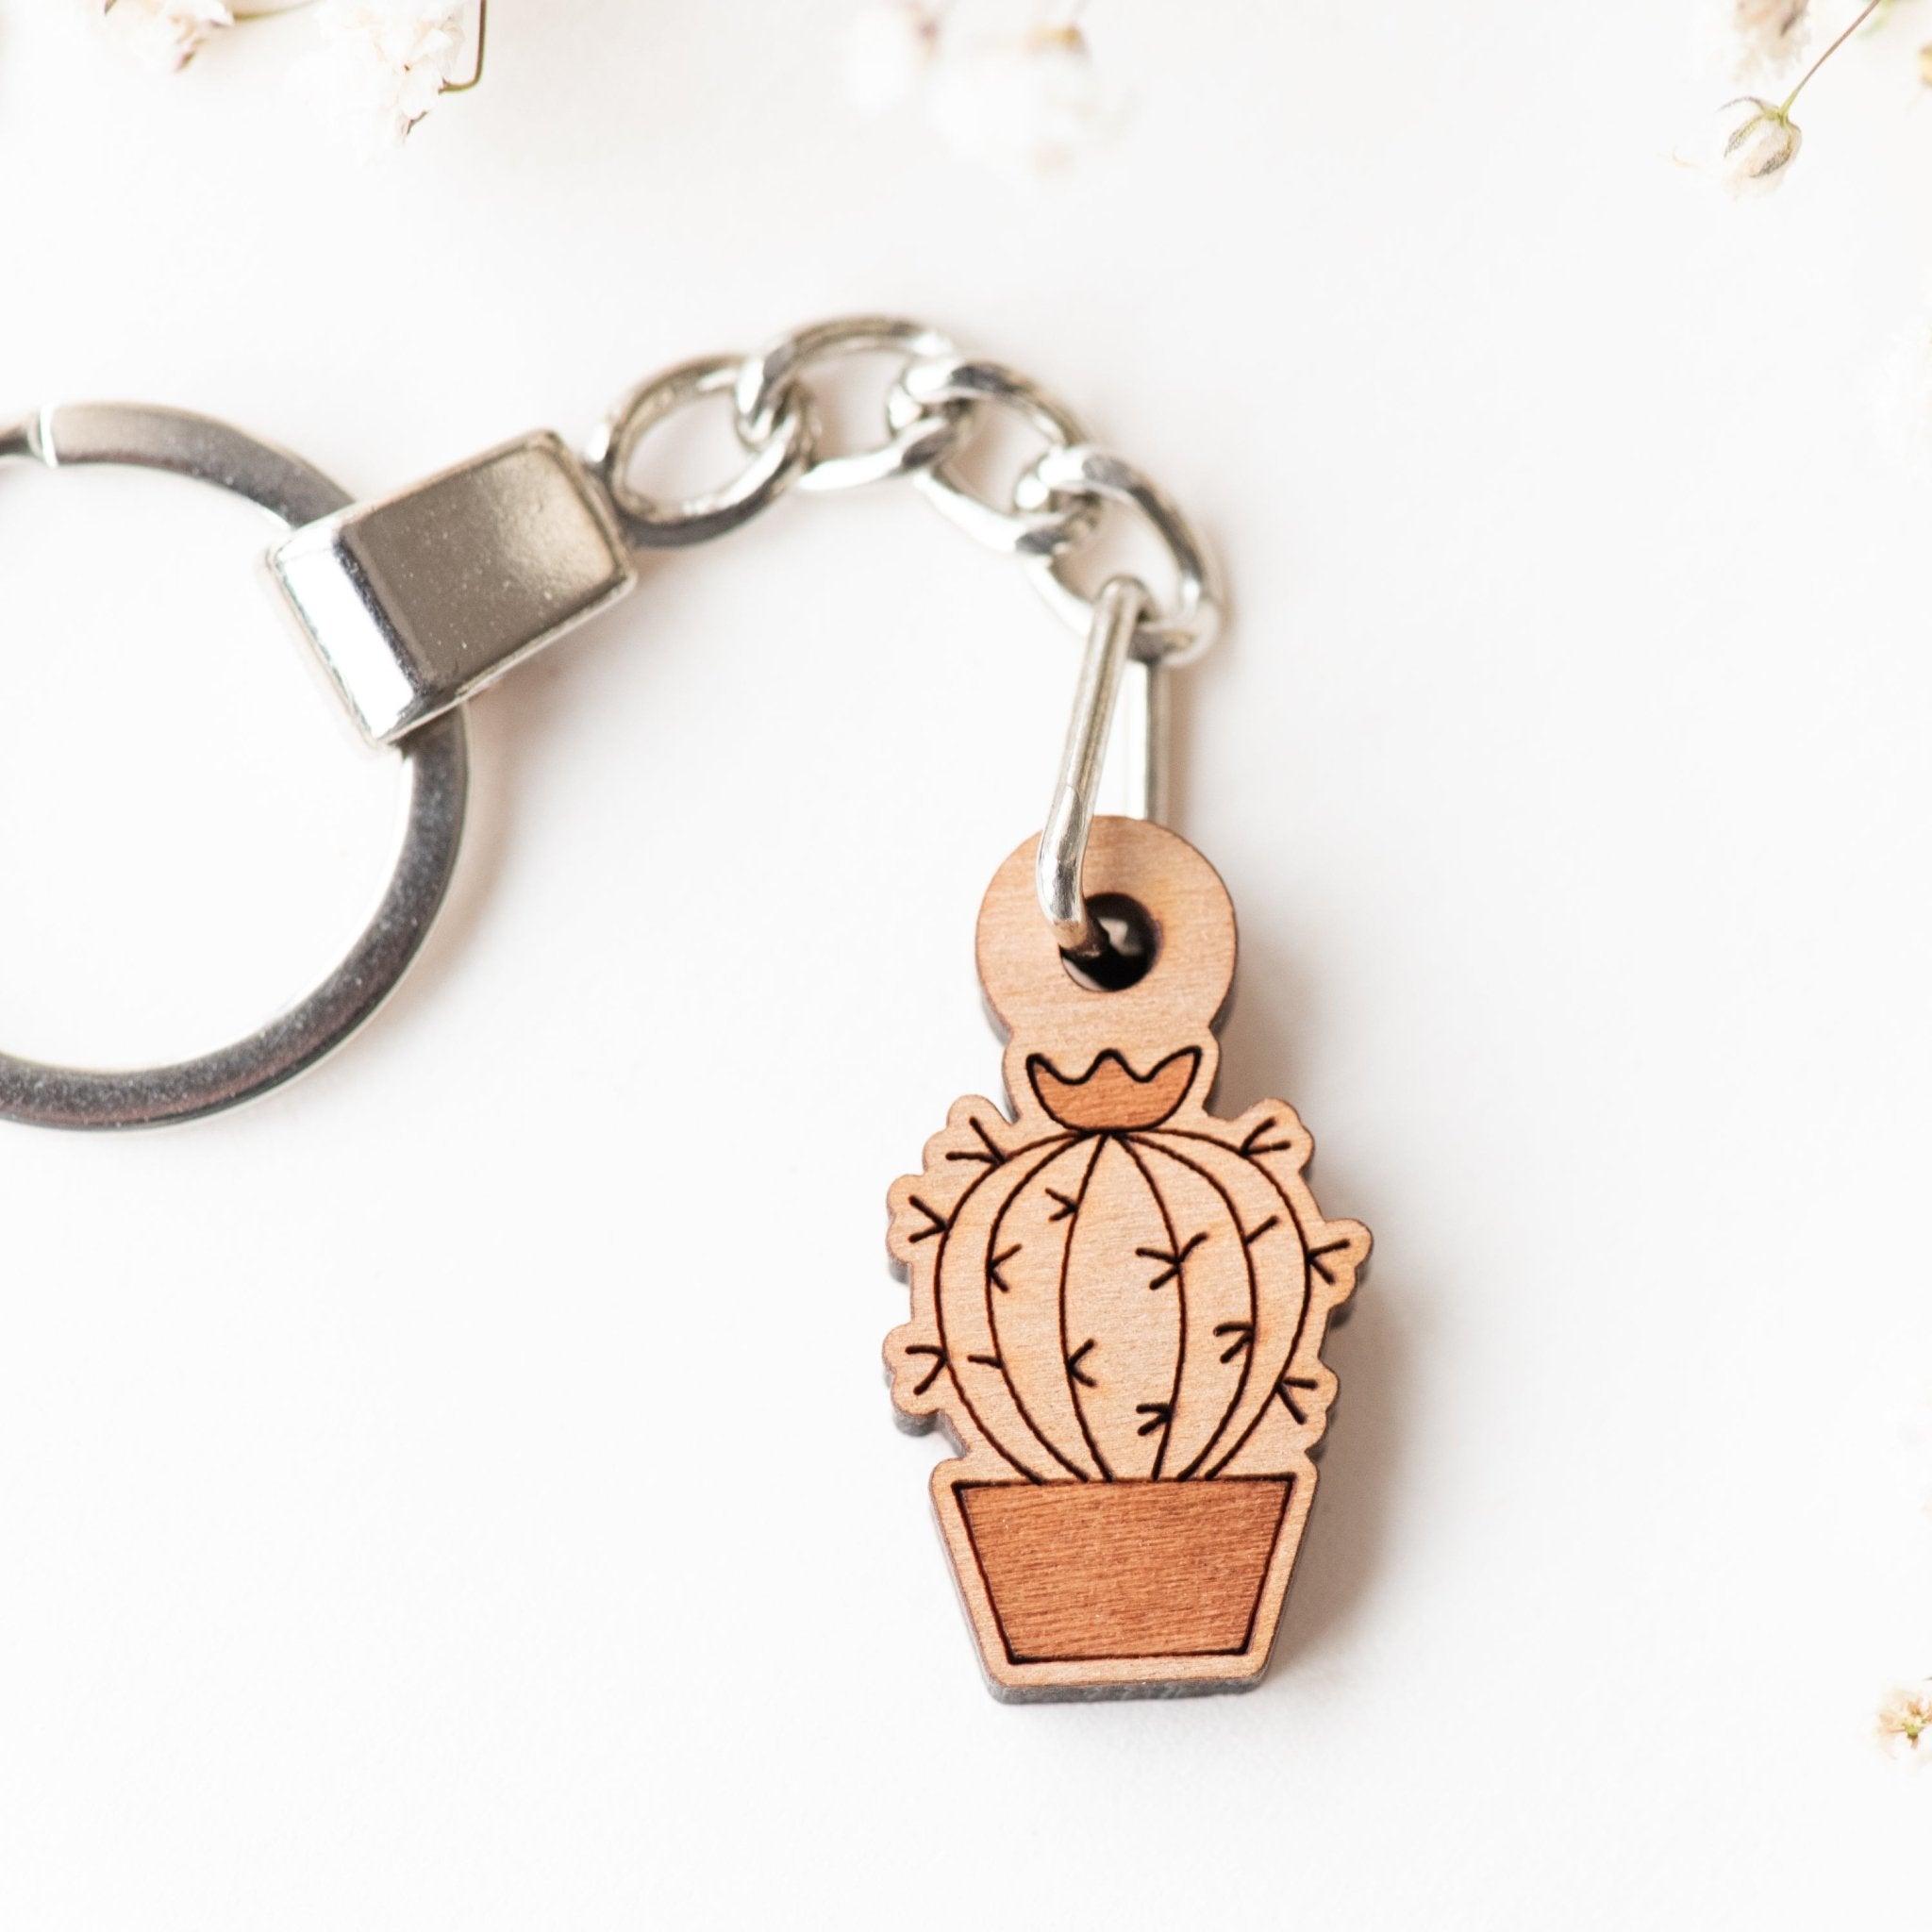 Cactus Cherry Wood Keyring - KO24016 - Robin Valley Official Store